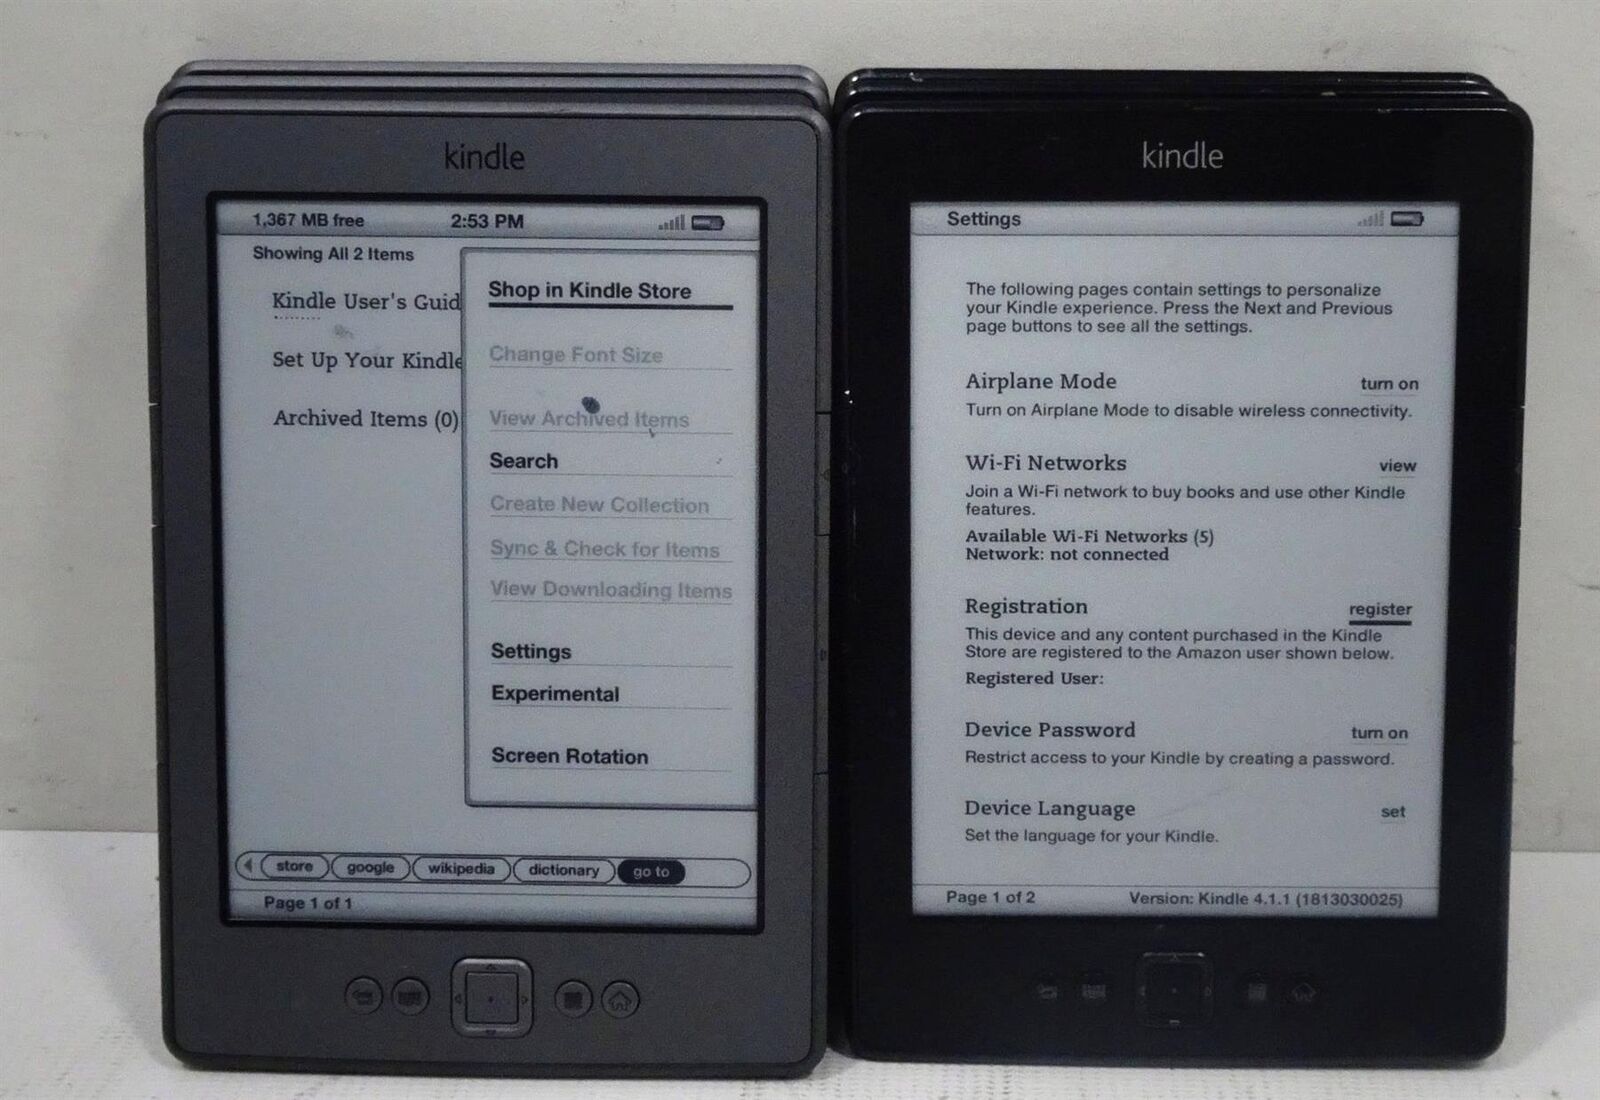 Lot 6 Amazon Kindle 4th Gen D01100 2GB eBook Reader - Please Read. Available Now for $79.99